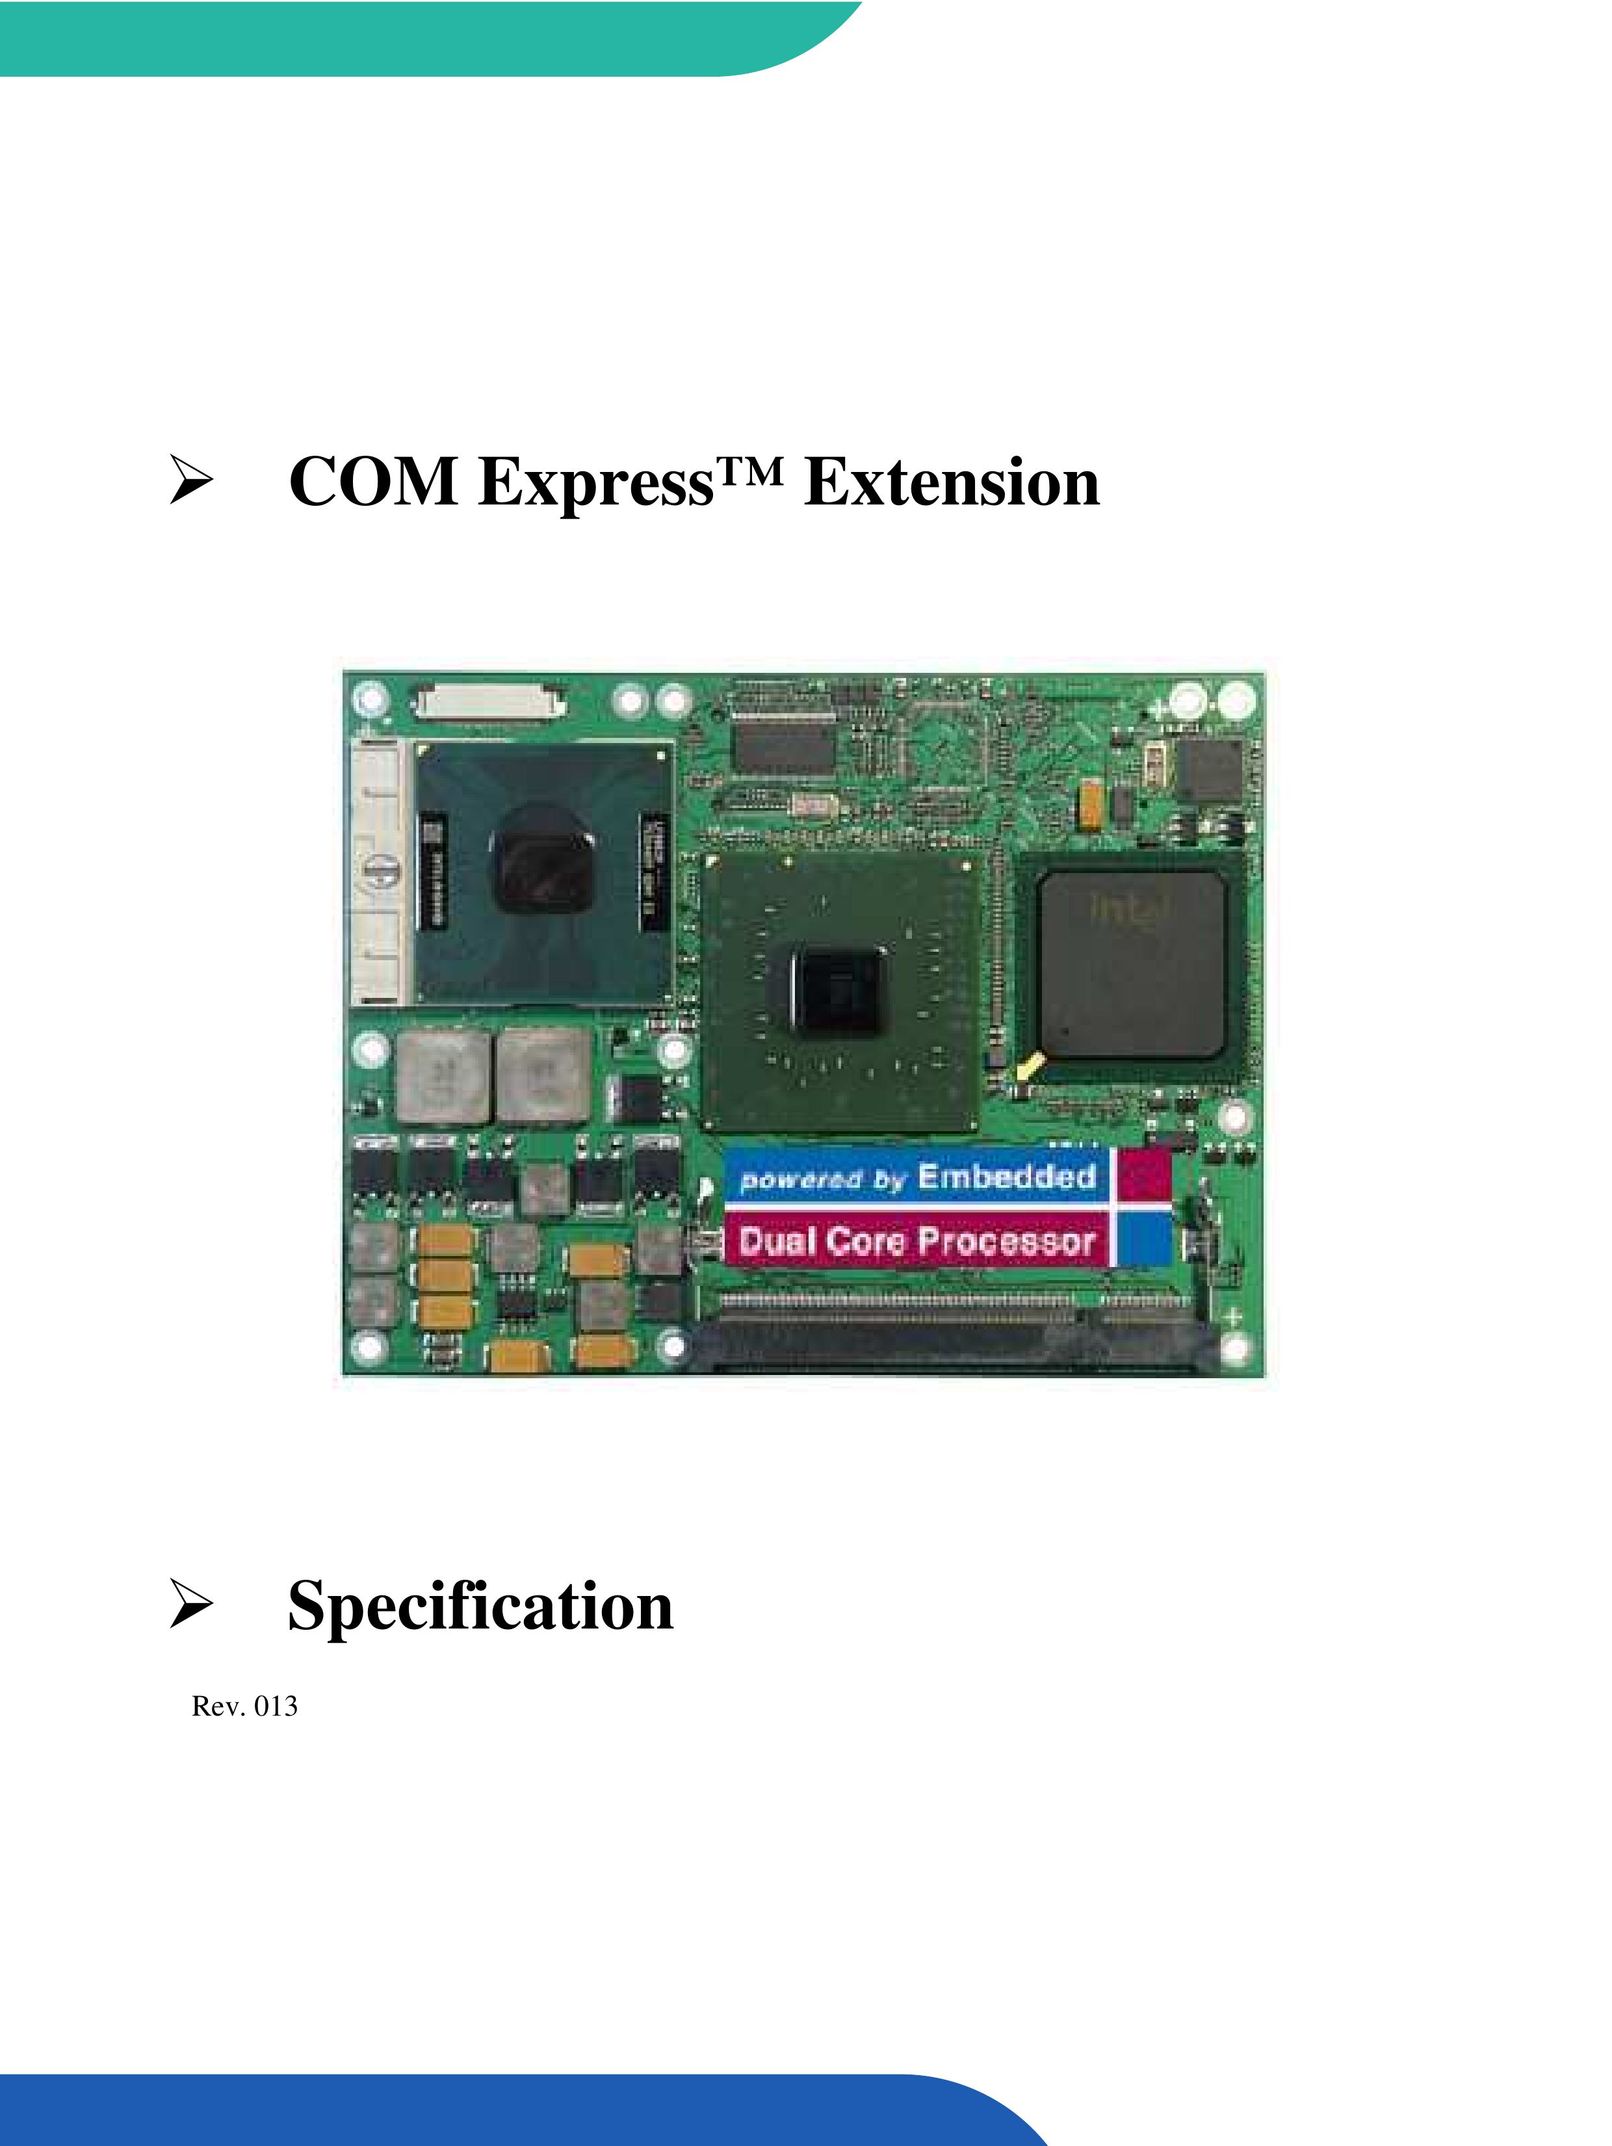 Compaq Extension Network Card User Manual